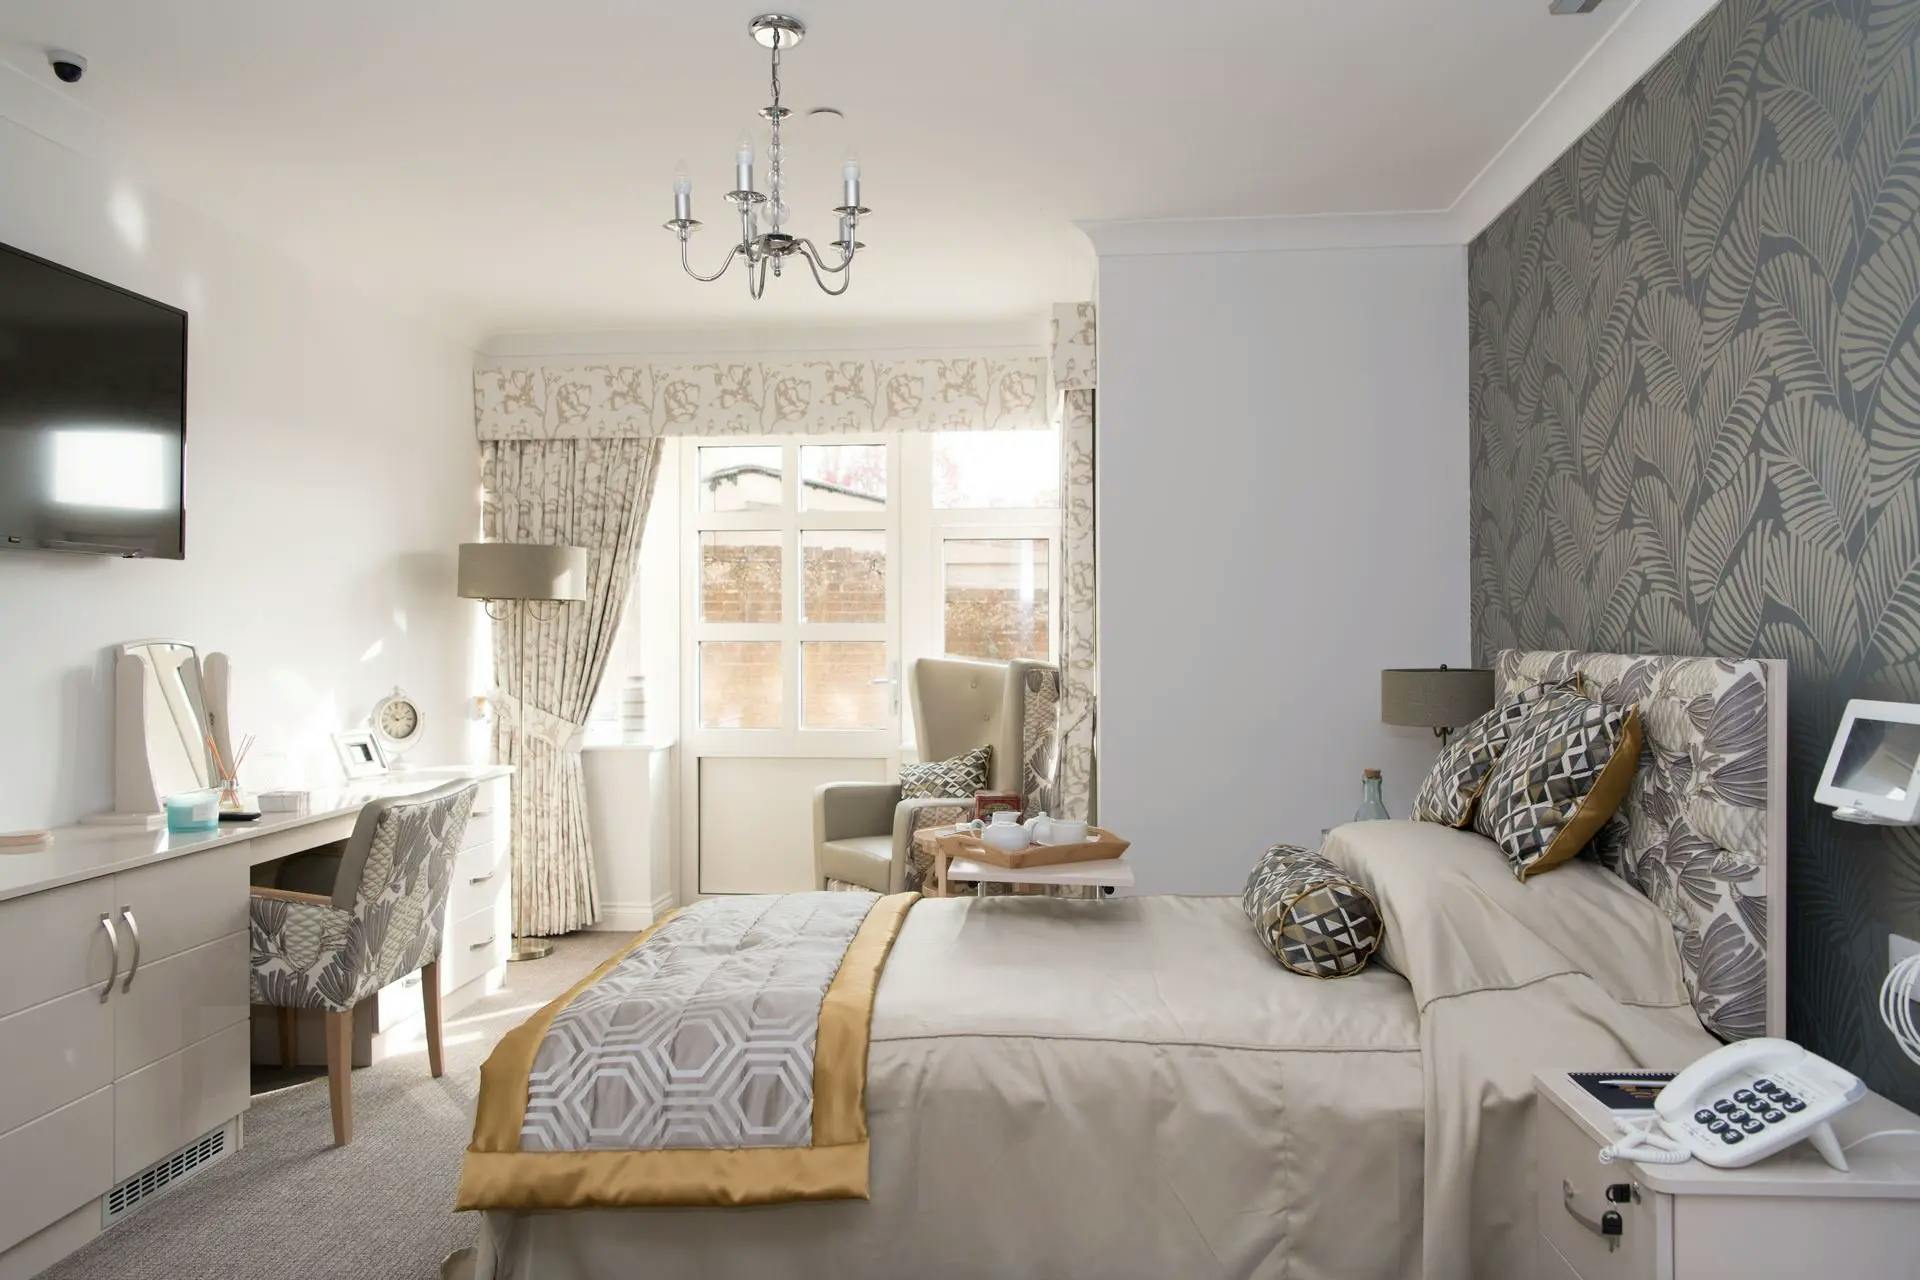 Bedroom at Brook House Care Home in Towcester, Northamptonshire